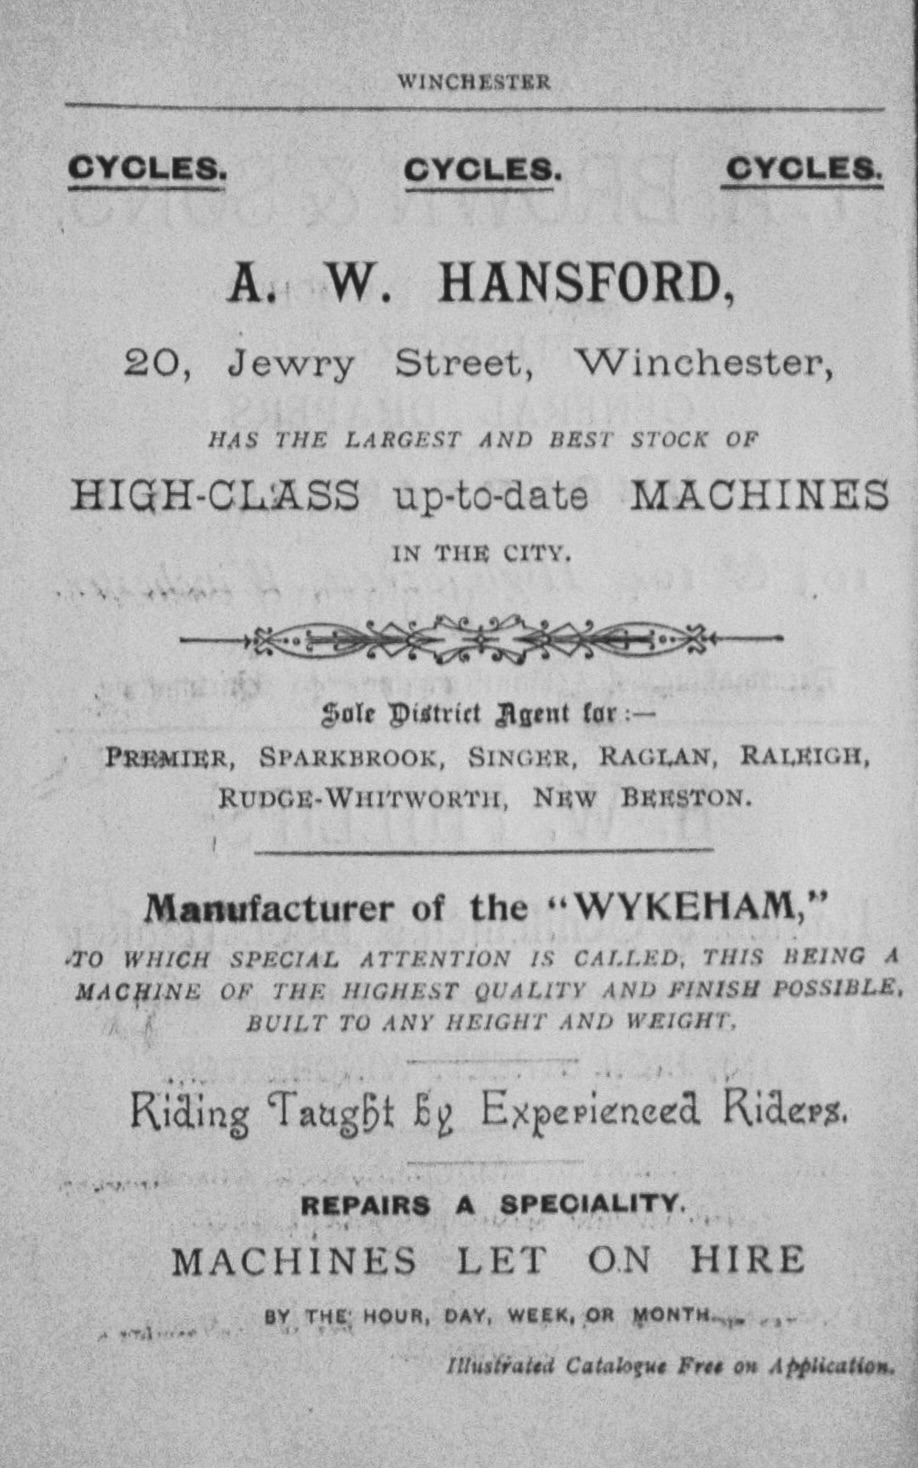 A. W. Hansford, 20, Jewry Street,  Winchester, (Cycles)  1897.